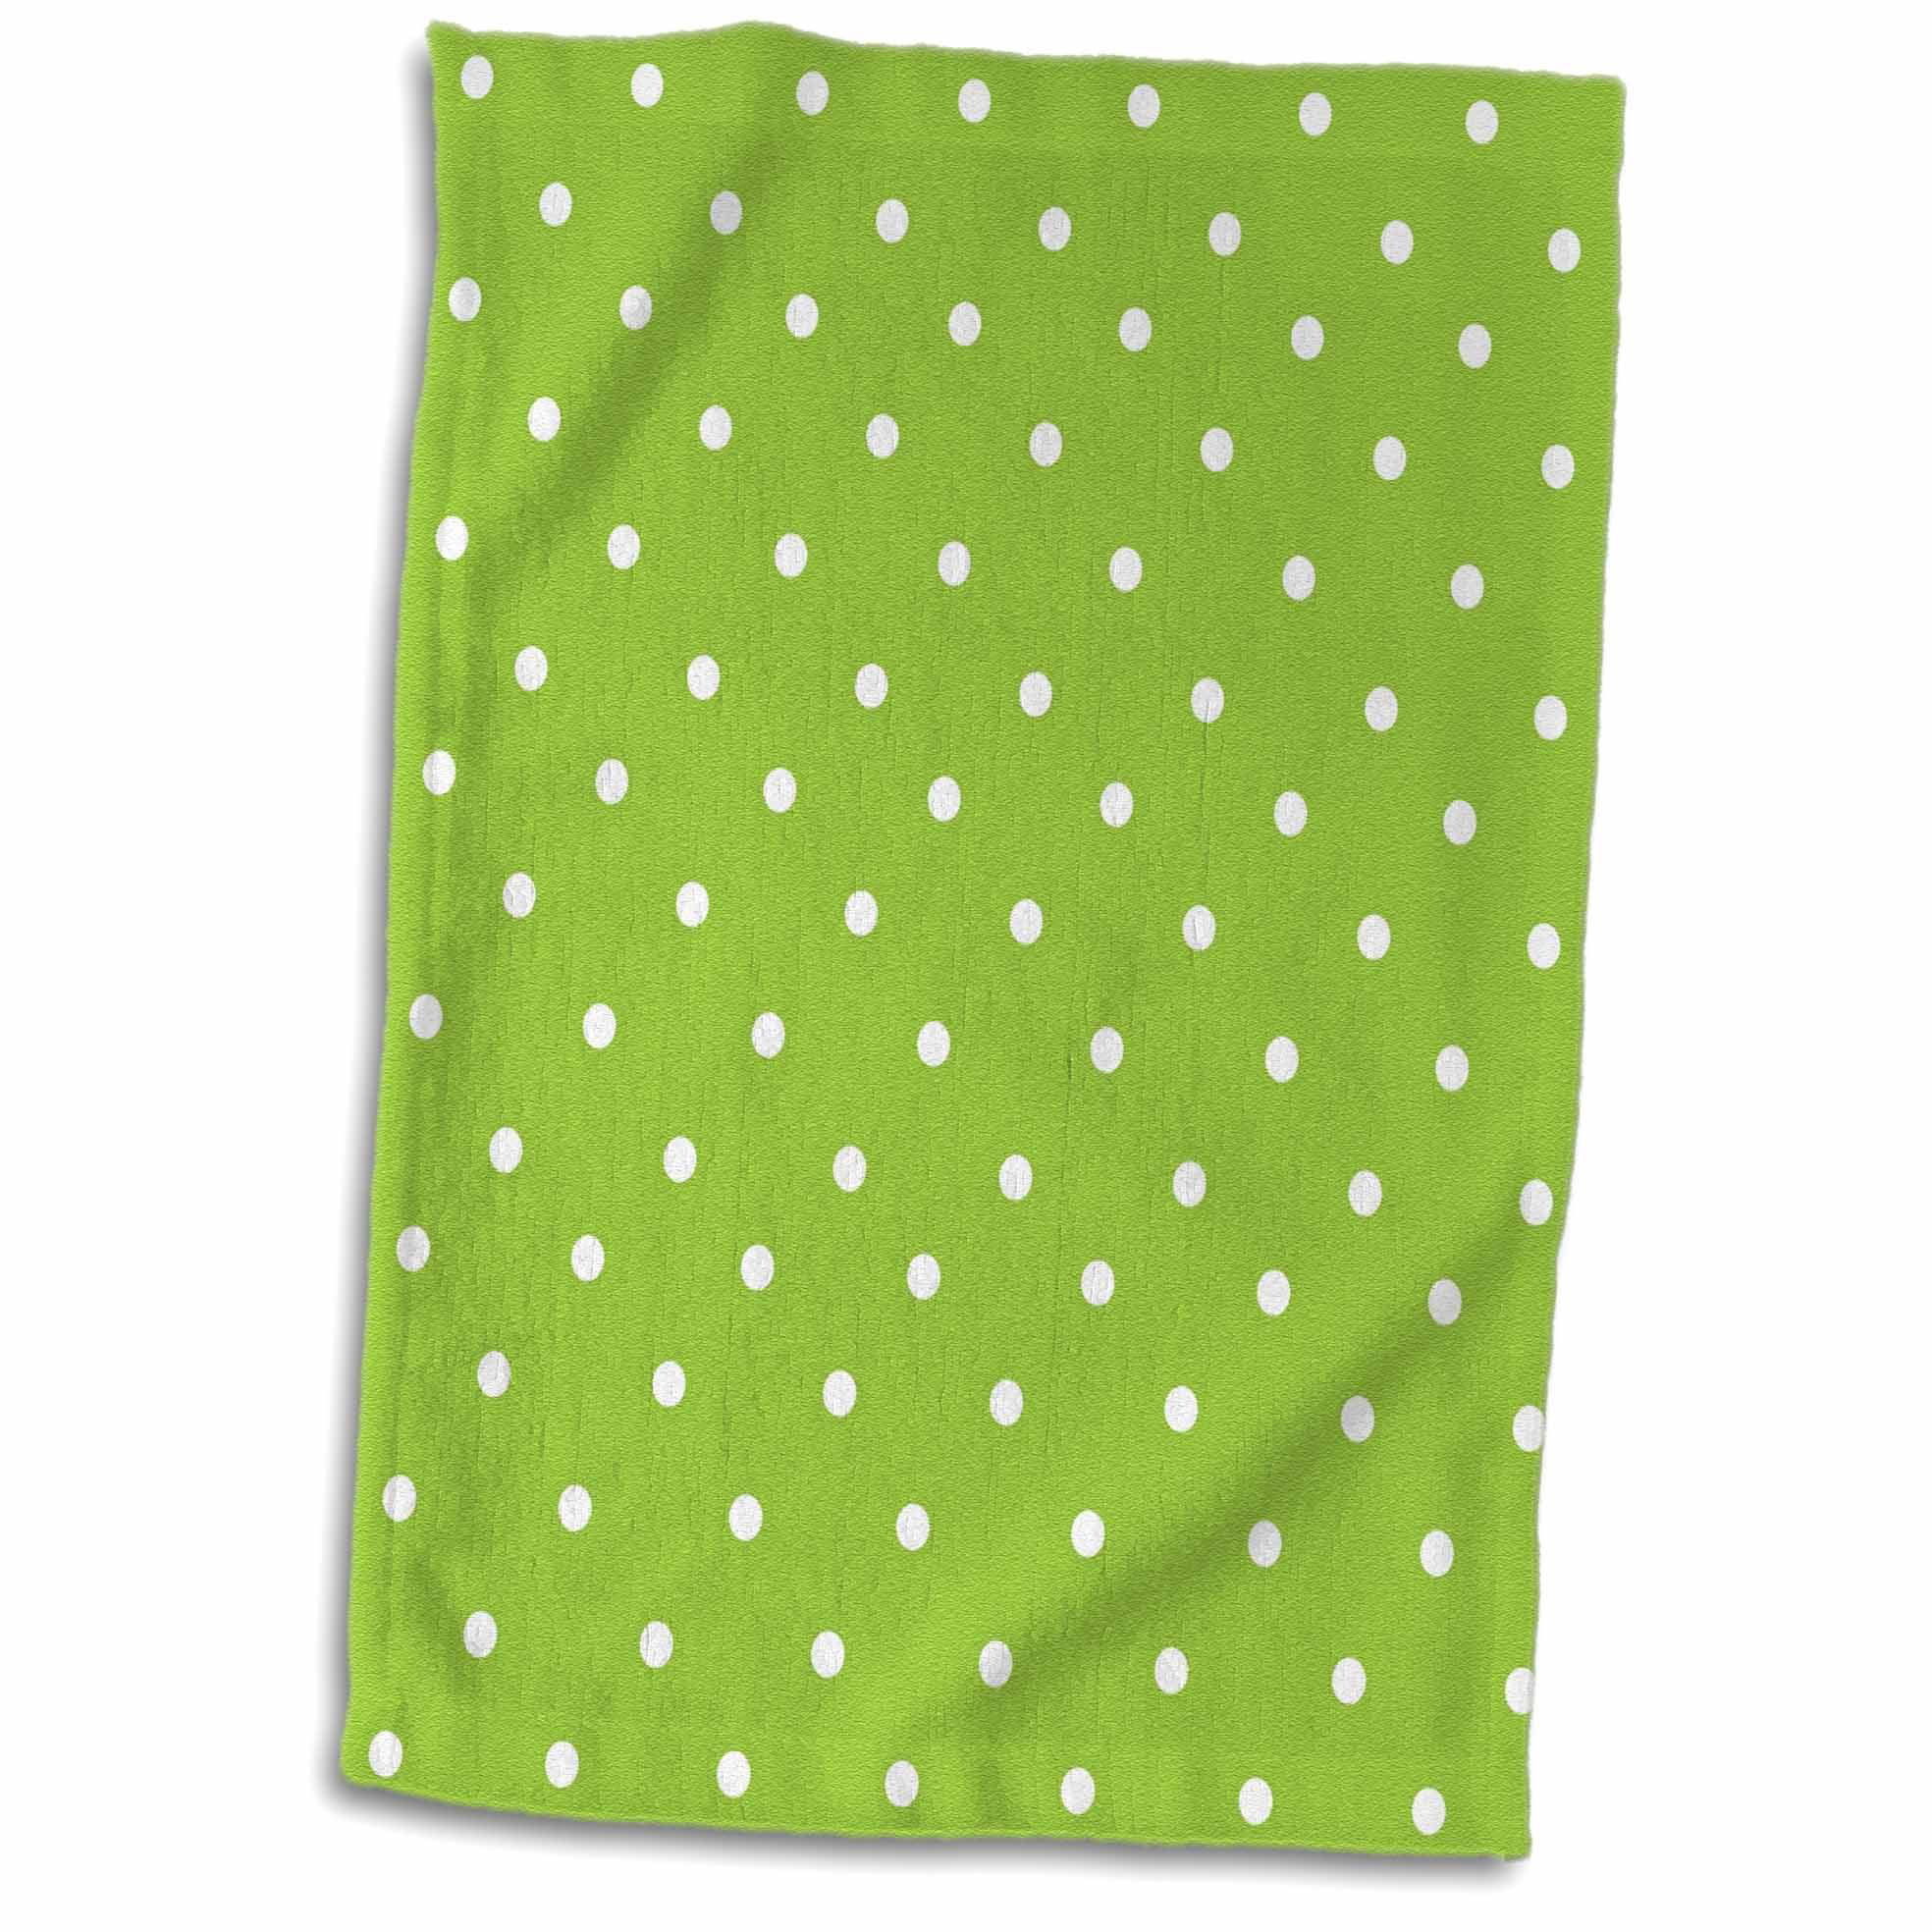 3D Rose Polka Pattern-Little White Dots On Bright Green-Classic Delicate Spots-Dotty Spotty Hand/Sports Towel 15 x 22 Multicolor 